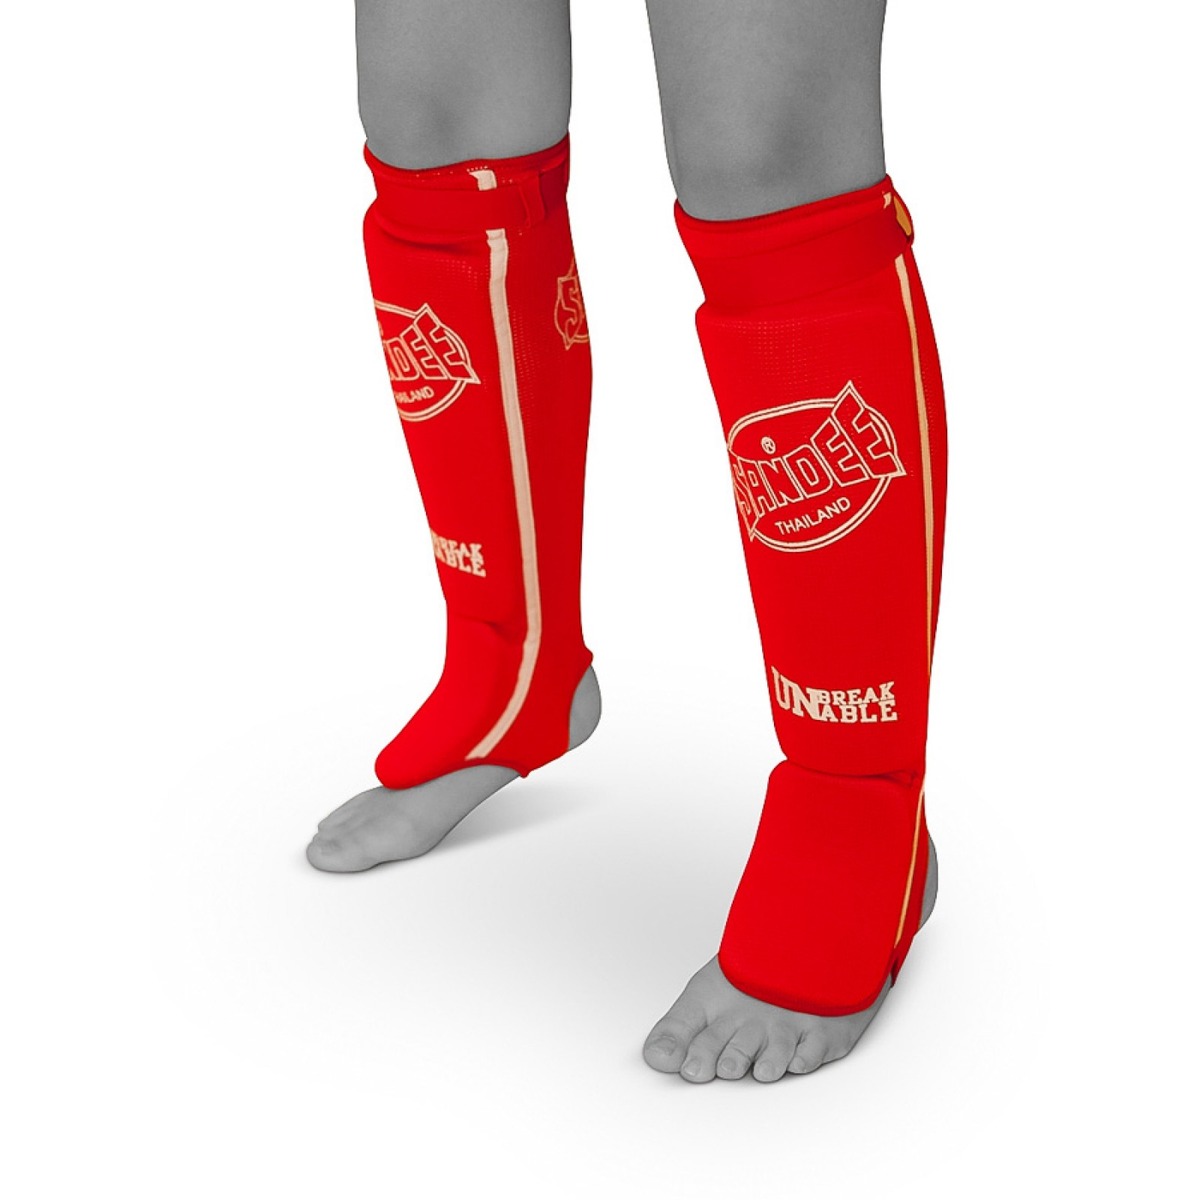 Sandee Competition Muay Thai Cotton Shin Pads - Red - Click Image to Close